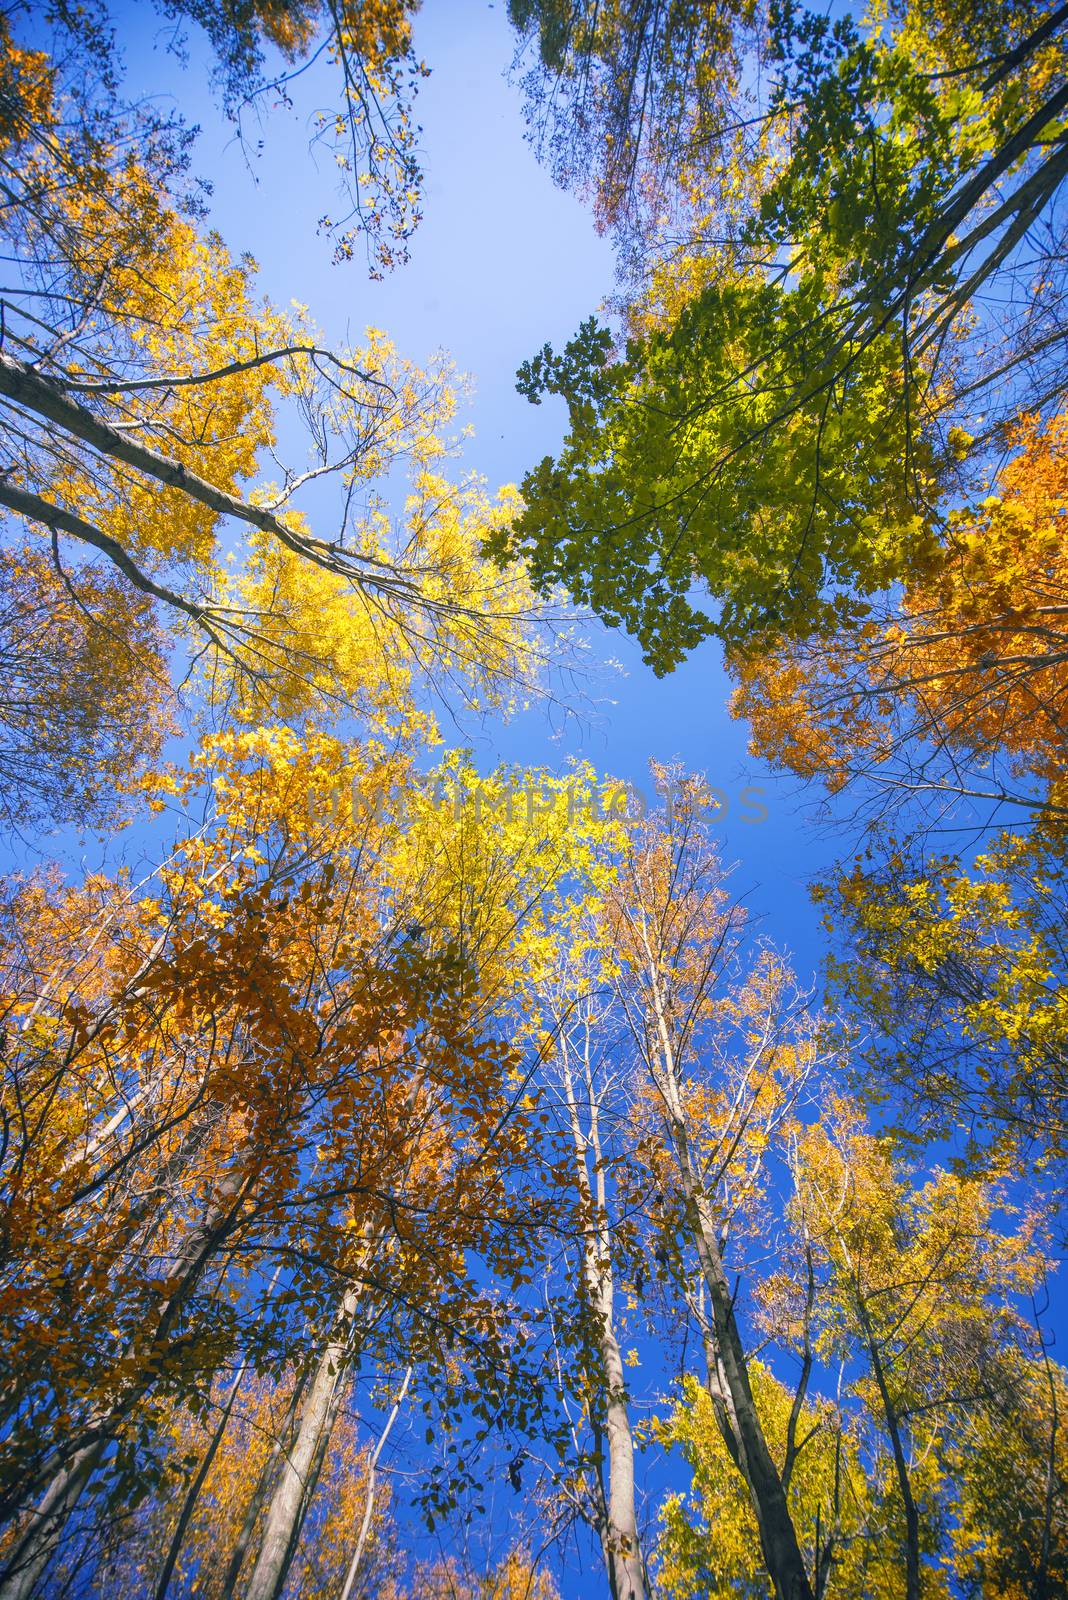 Tall trees with colorful autumn foliage by rgbspace